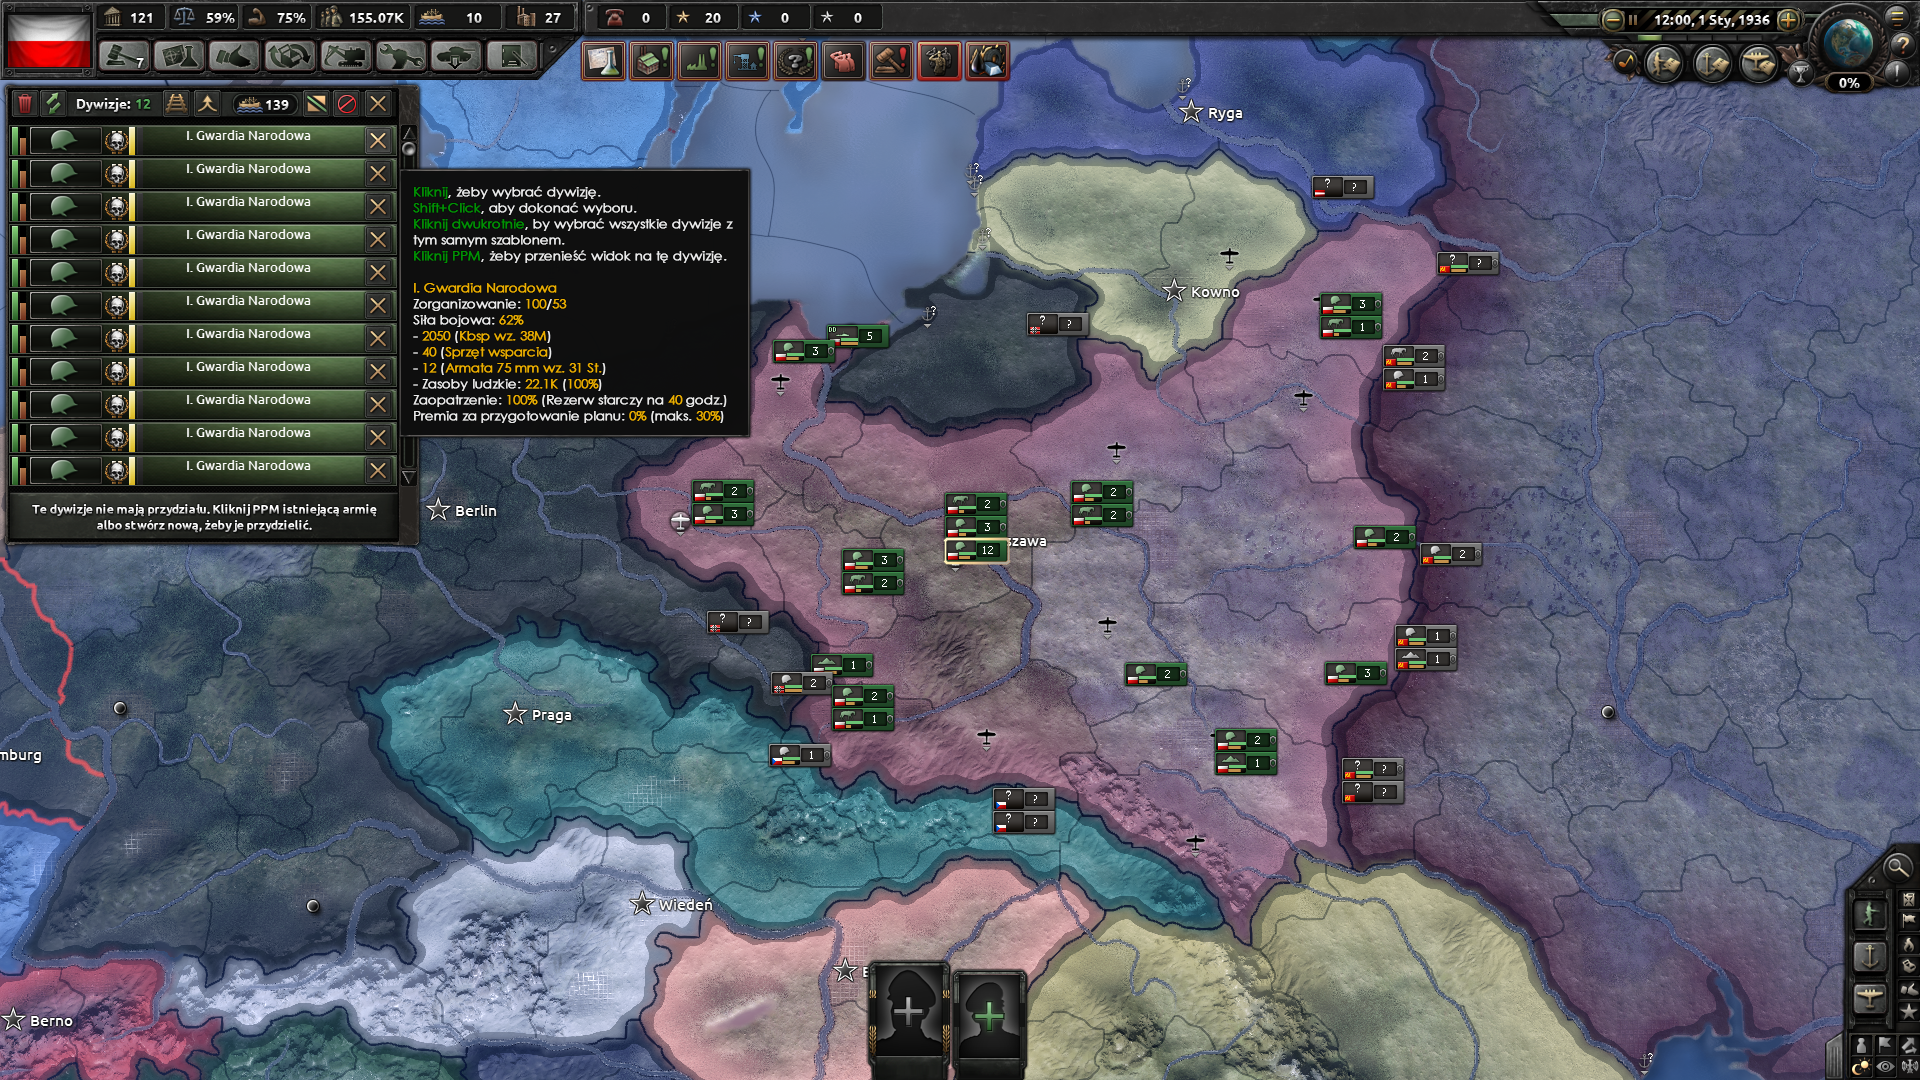 hearts of iron 4 dlc download 1.7.3